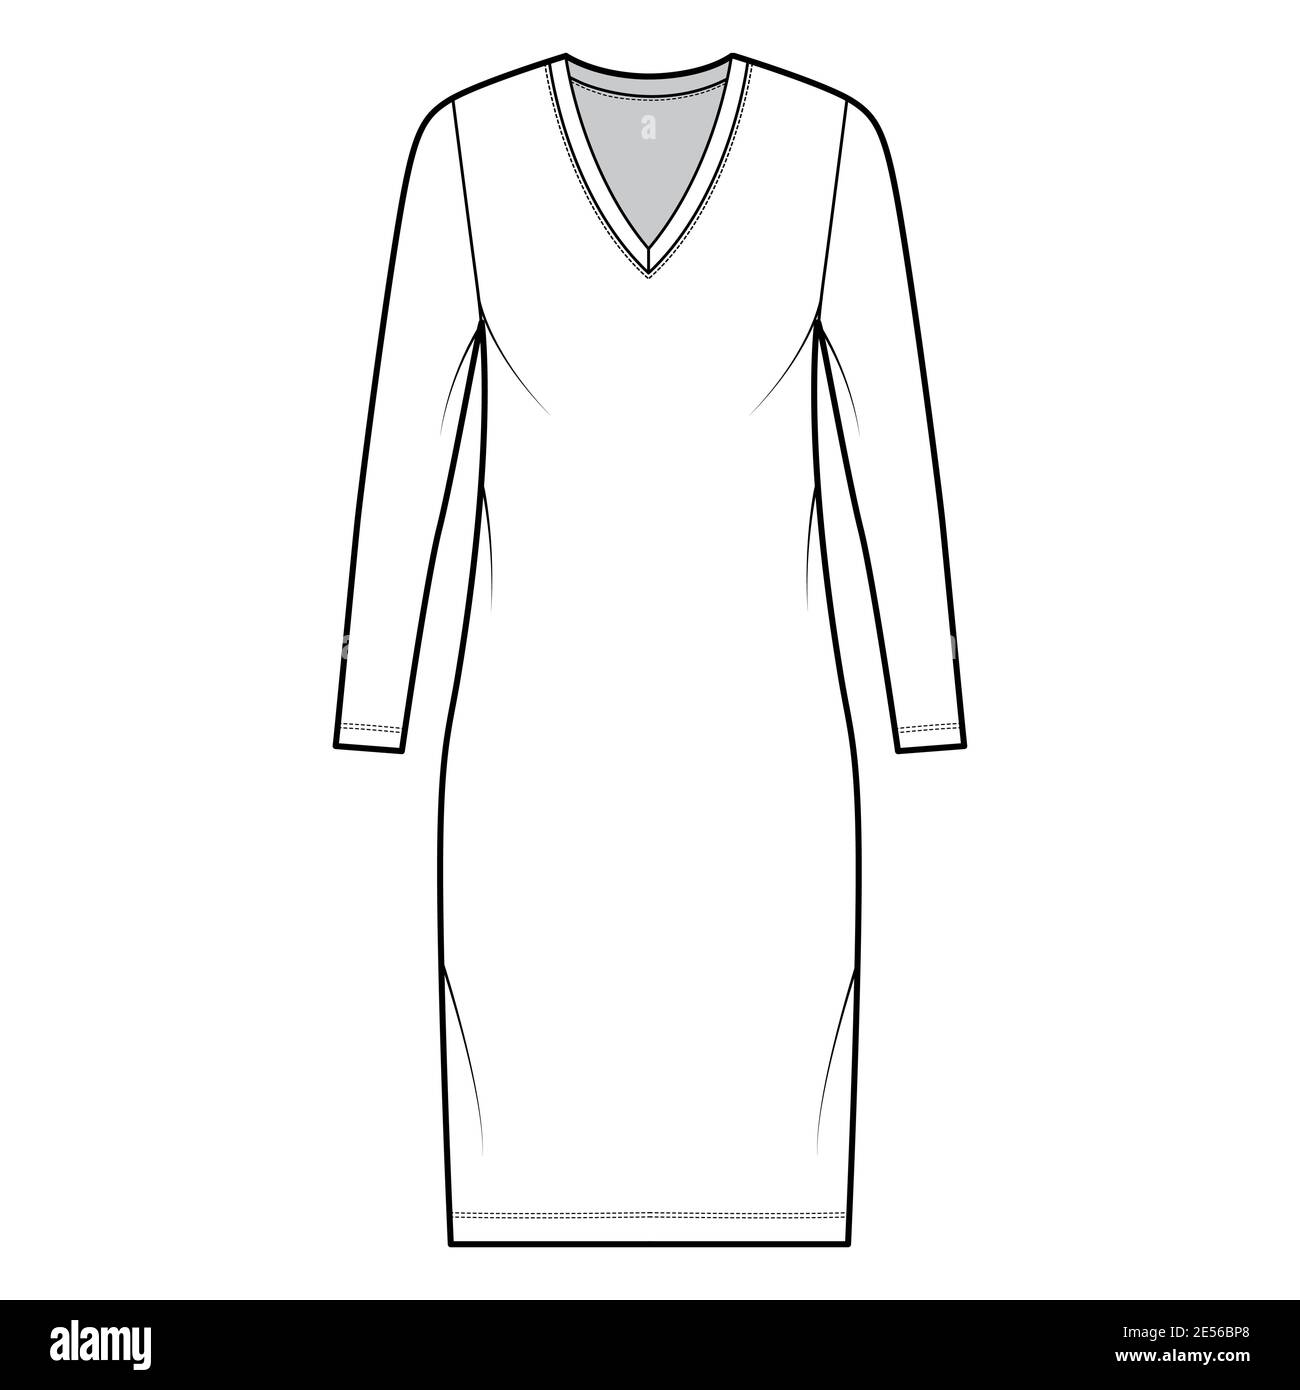 Dress Tunic Technical Fashion Illustration With Tie Elbow Sleeves  Oversized Body Mini Length Skirt Slashed Neck Flat Apparel Front White  Color Style Women Men CAD Mockup Royalty Free SVG Cliparts Vectors And